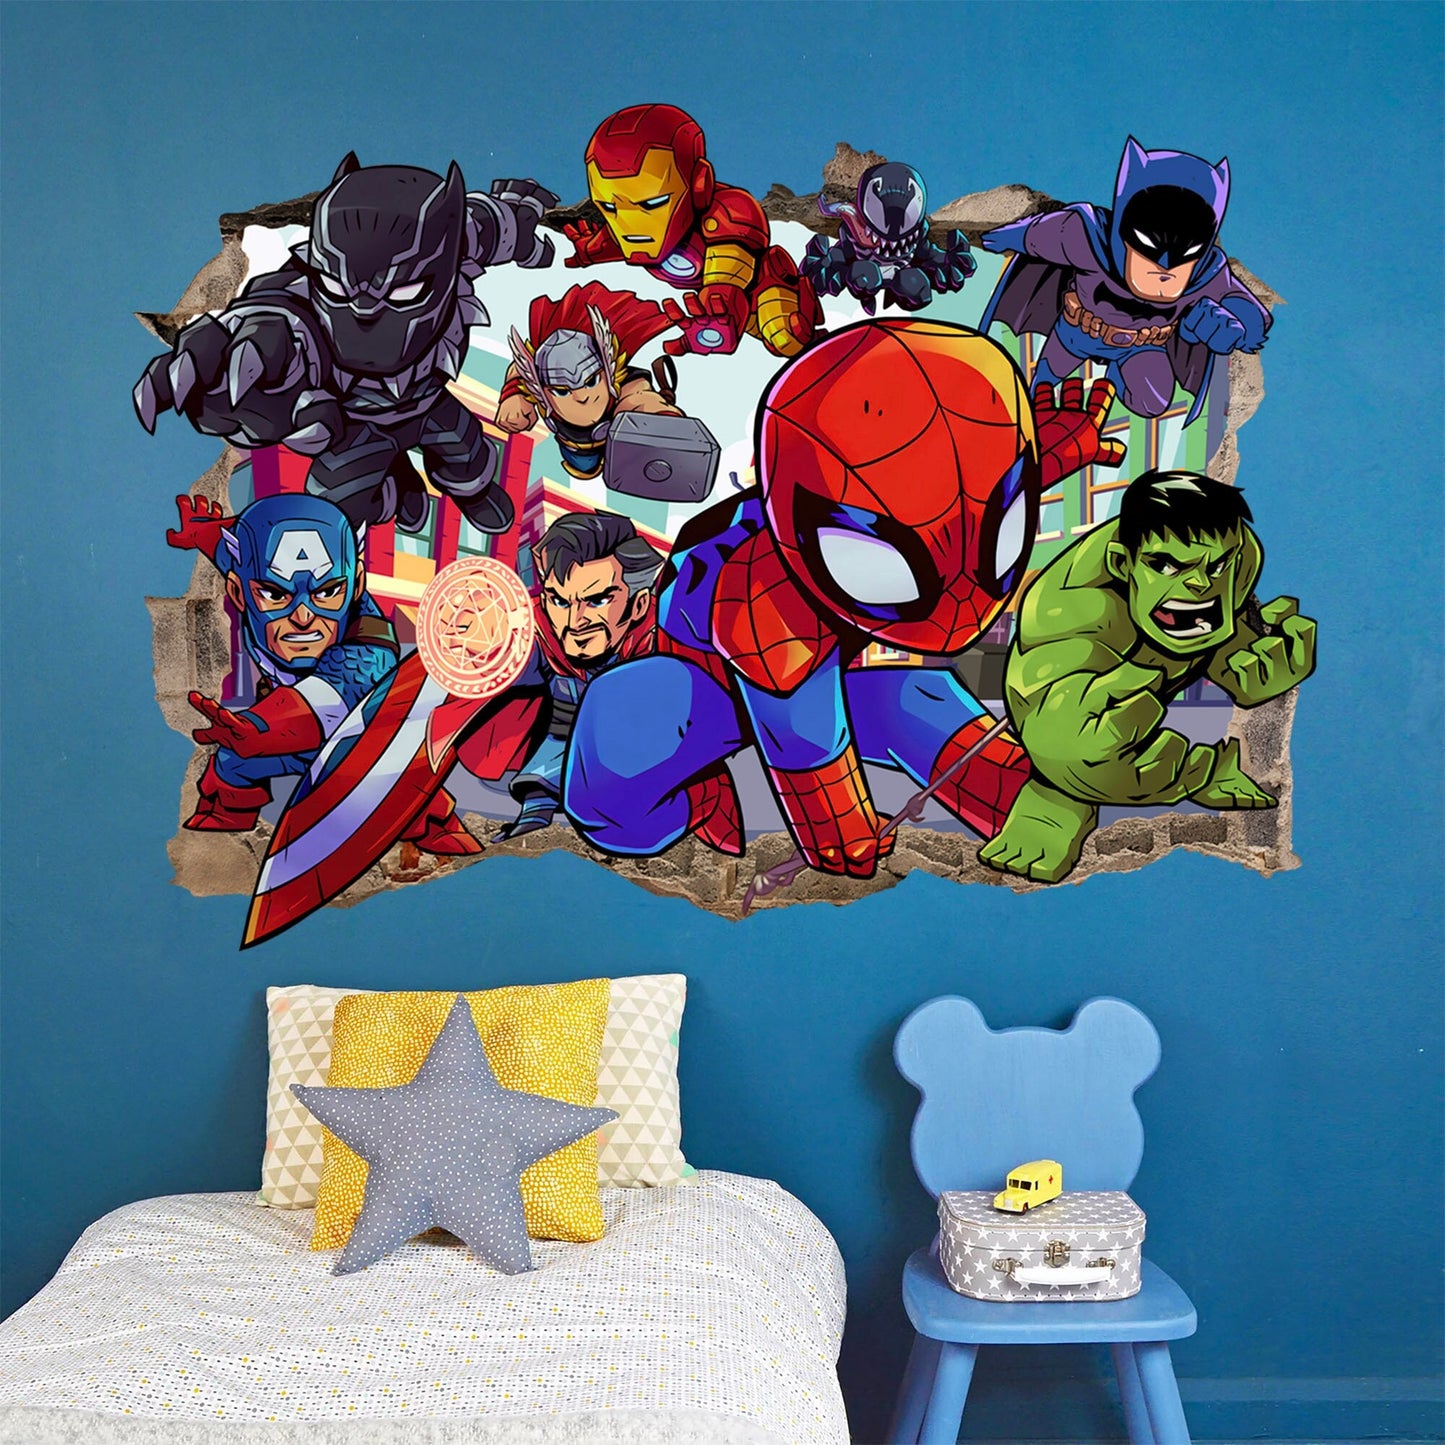 Bursting Avengers Super heroes Spiderman Iron Man Hulk Captain America 3D Smashed Wall Decal - BR344